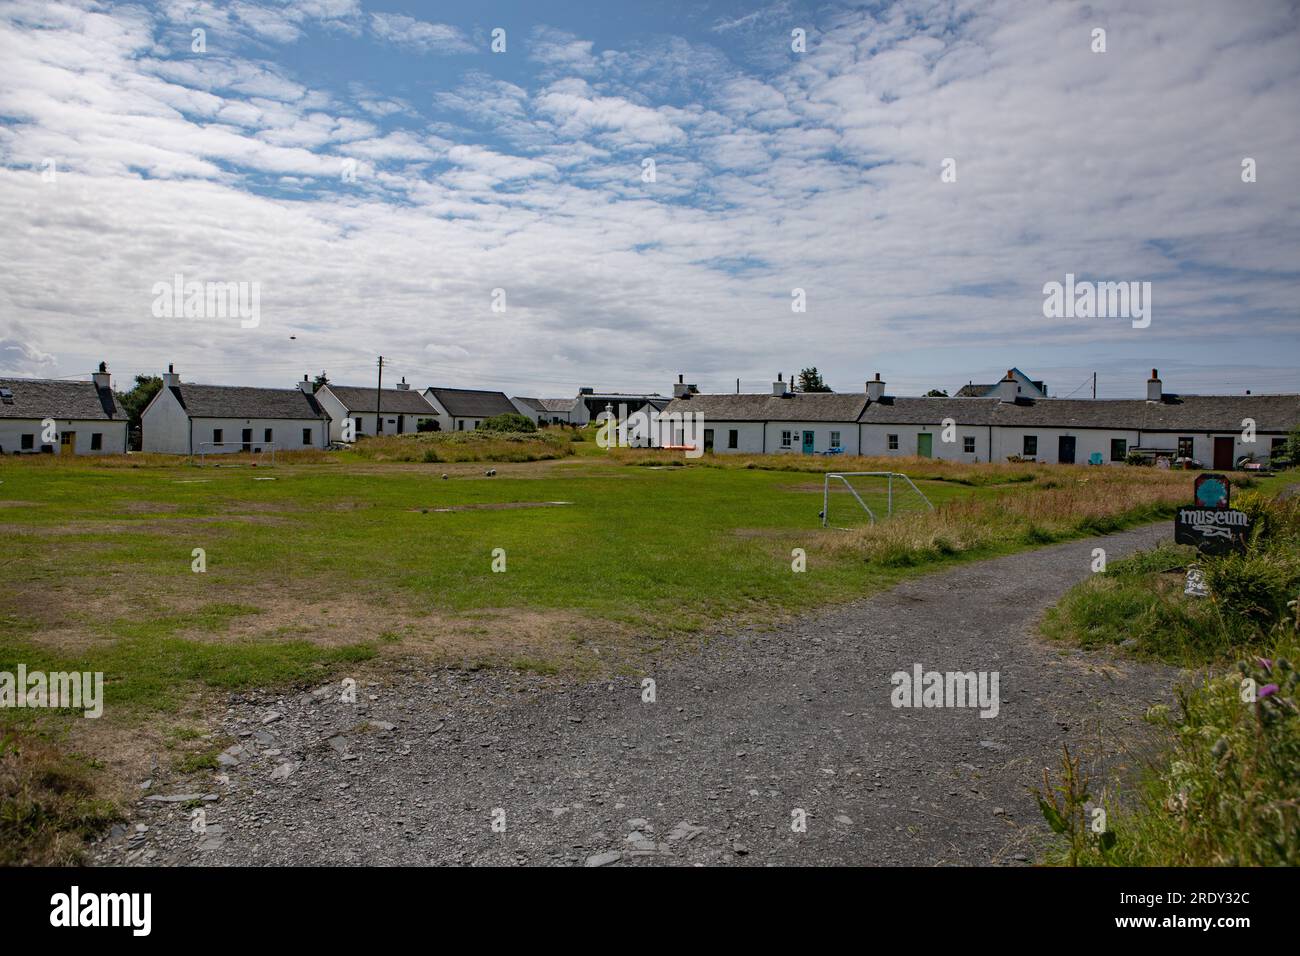 Workers Cottages, Easdale Island Stock Photo